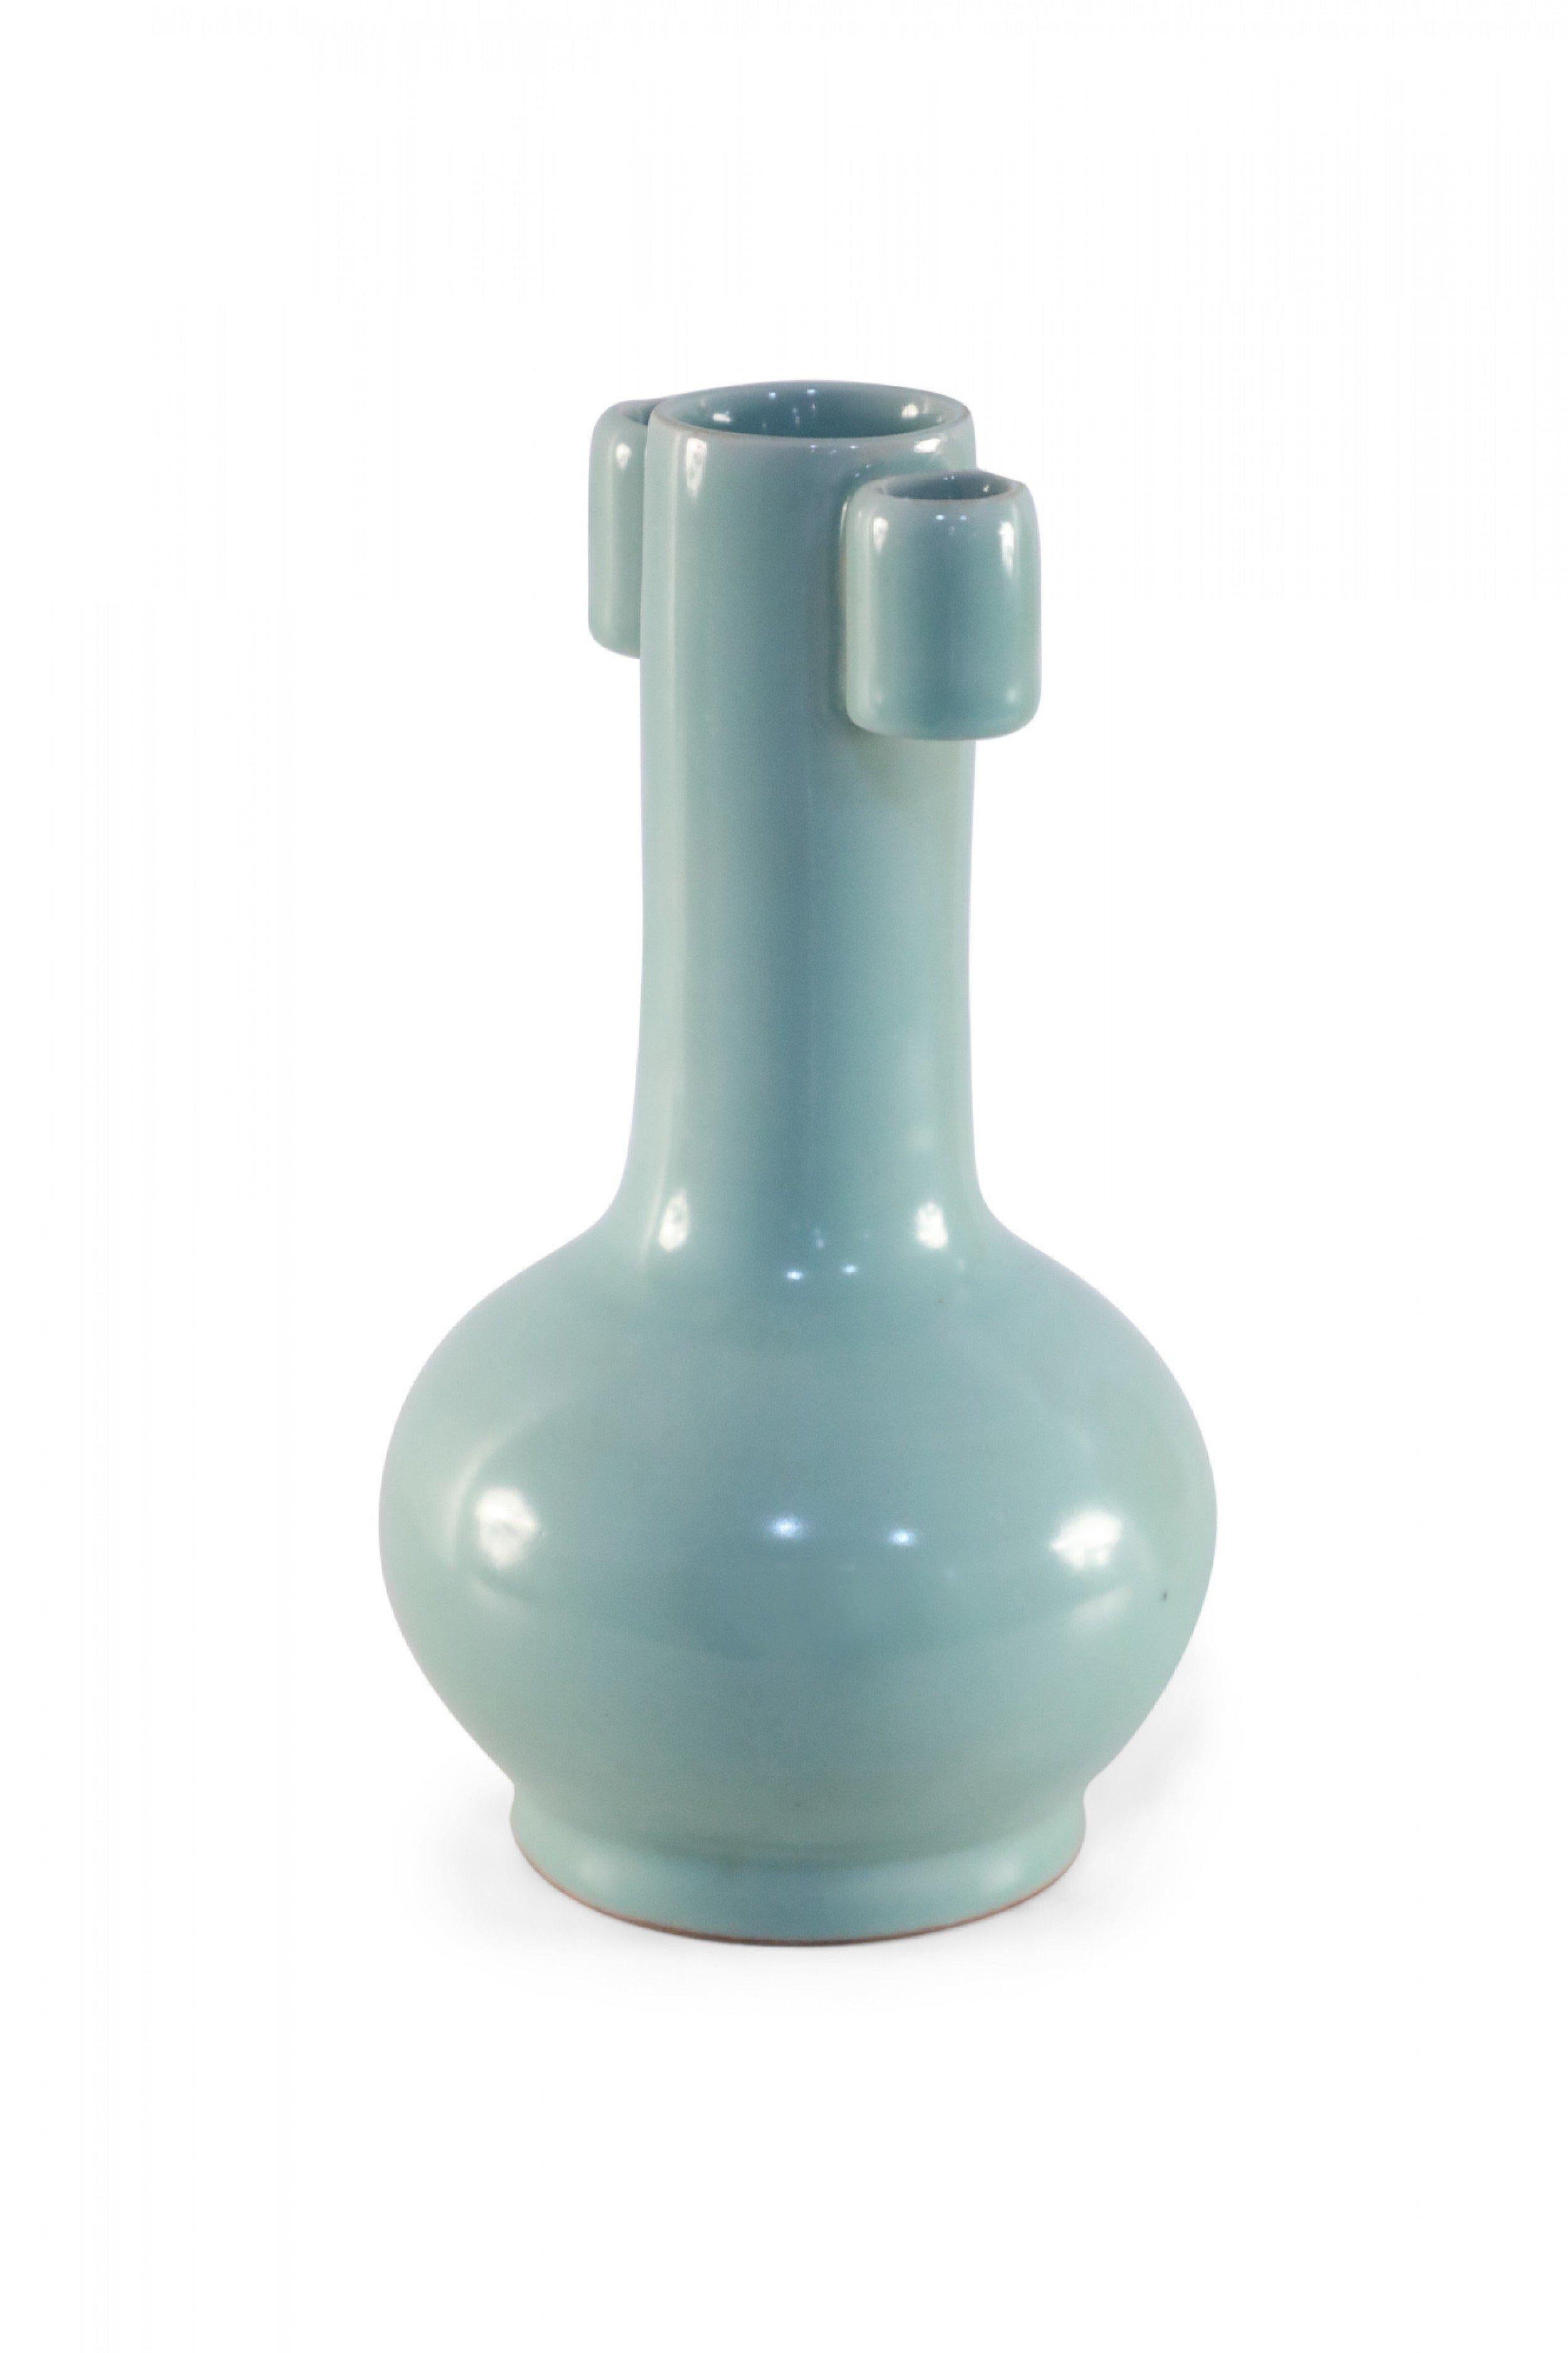 Antique Chinese (late 19th century) sky blue porcelain vase with a bulbous base and thin neck flanked by two lug ears at its top.
   